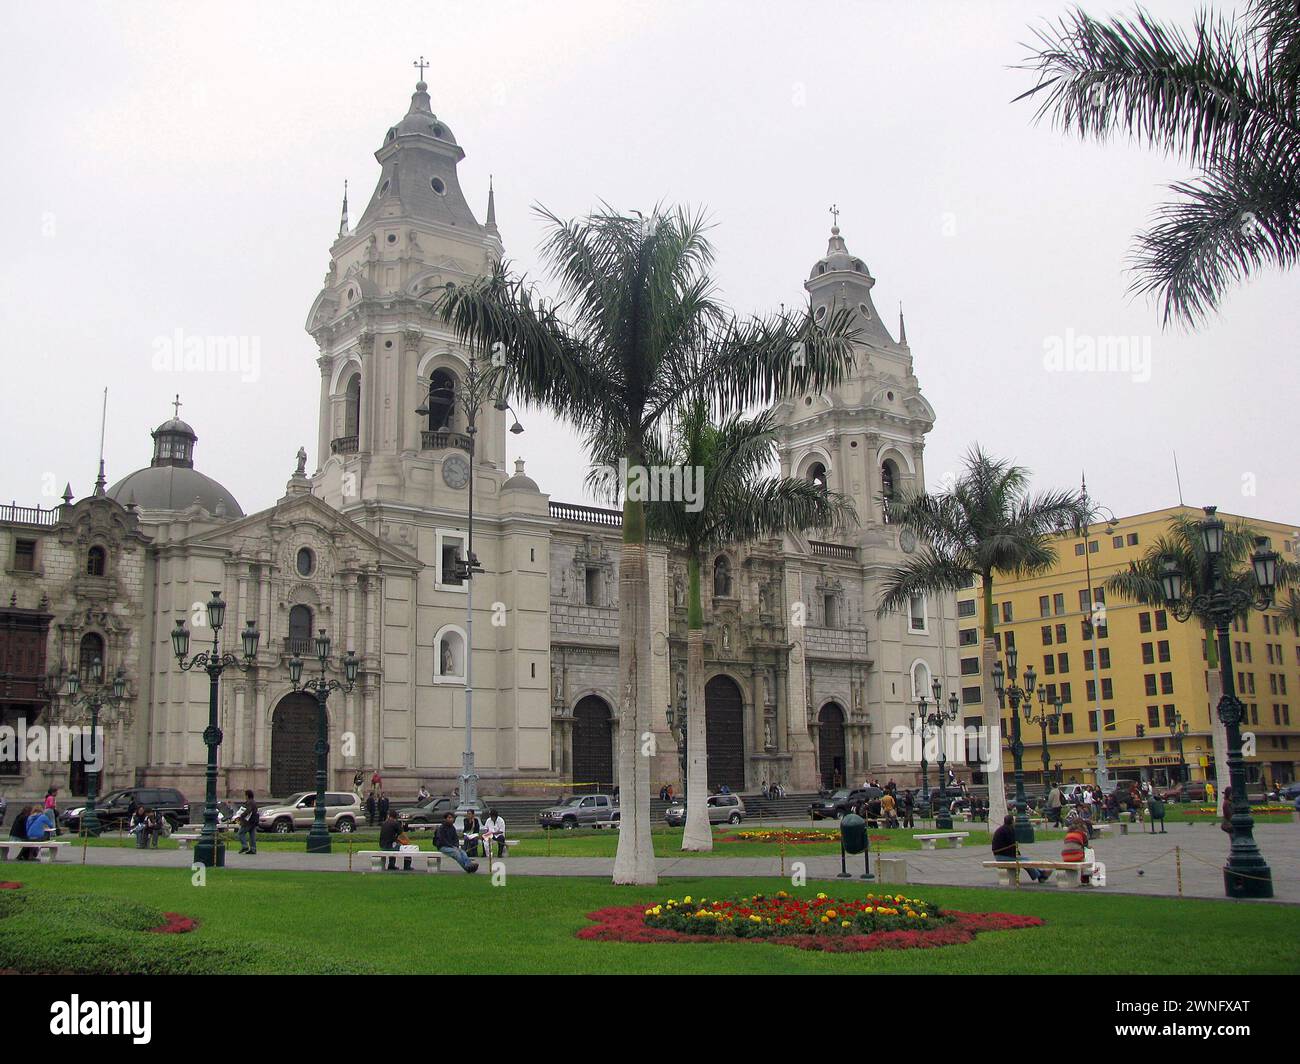 Lima, Peru - jul 09, 2008 - The Basilica Cathedral of Lima on Plaza Mayor or Plaza de Armas. Located in the Historic Centre of Lima, Peru. People and Stock Photo